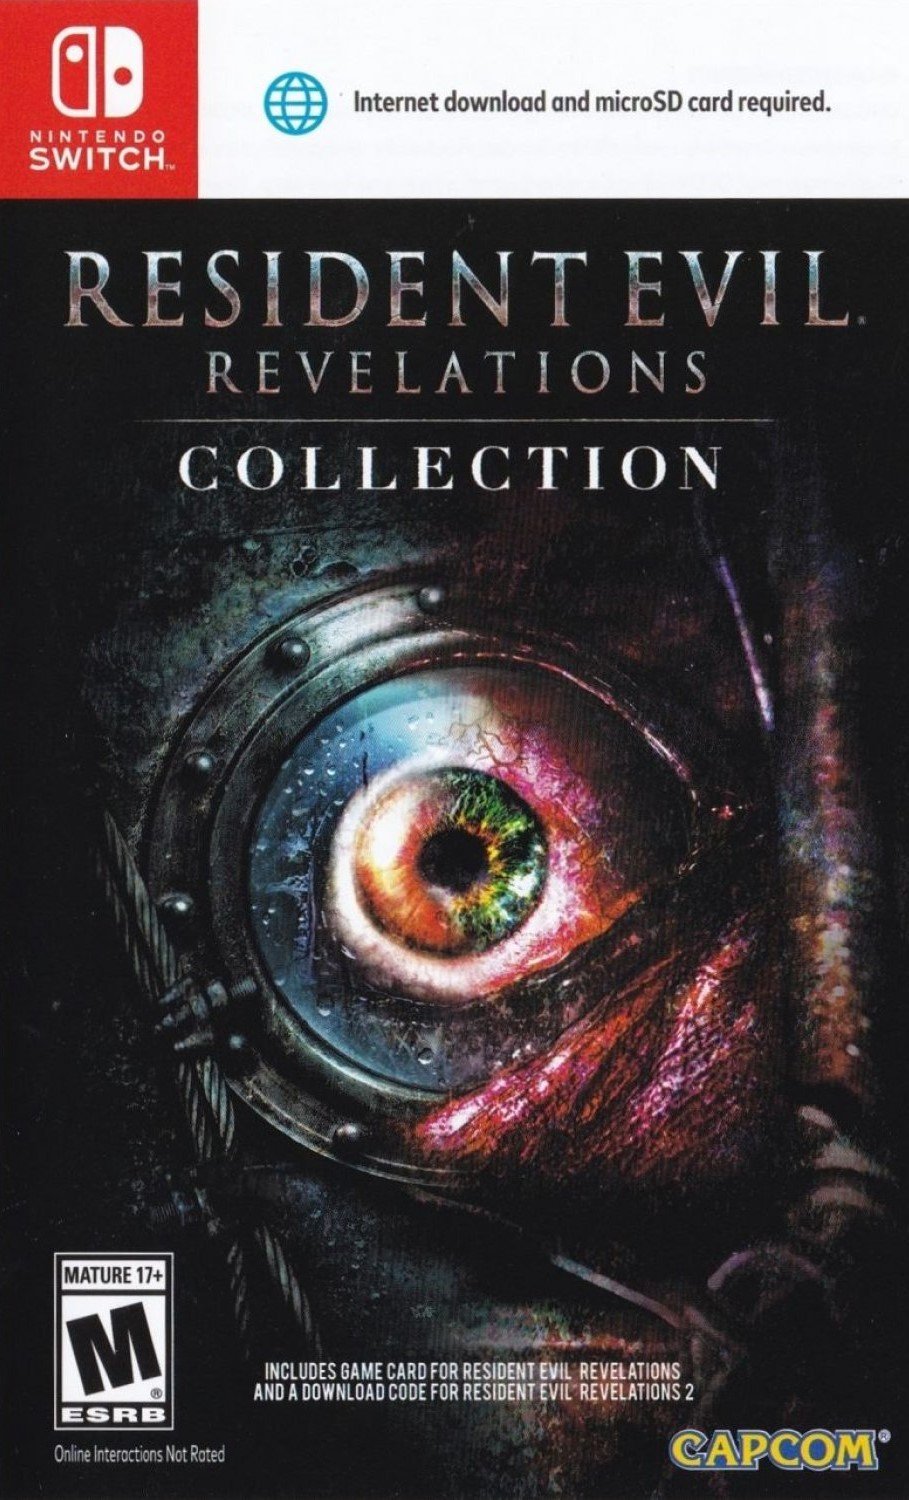 Image of Resident Evil Revelations Collection